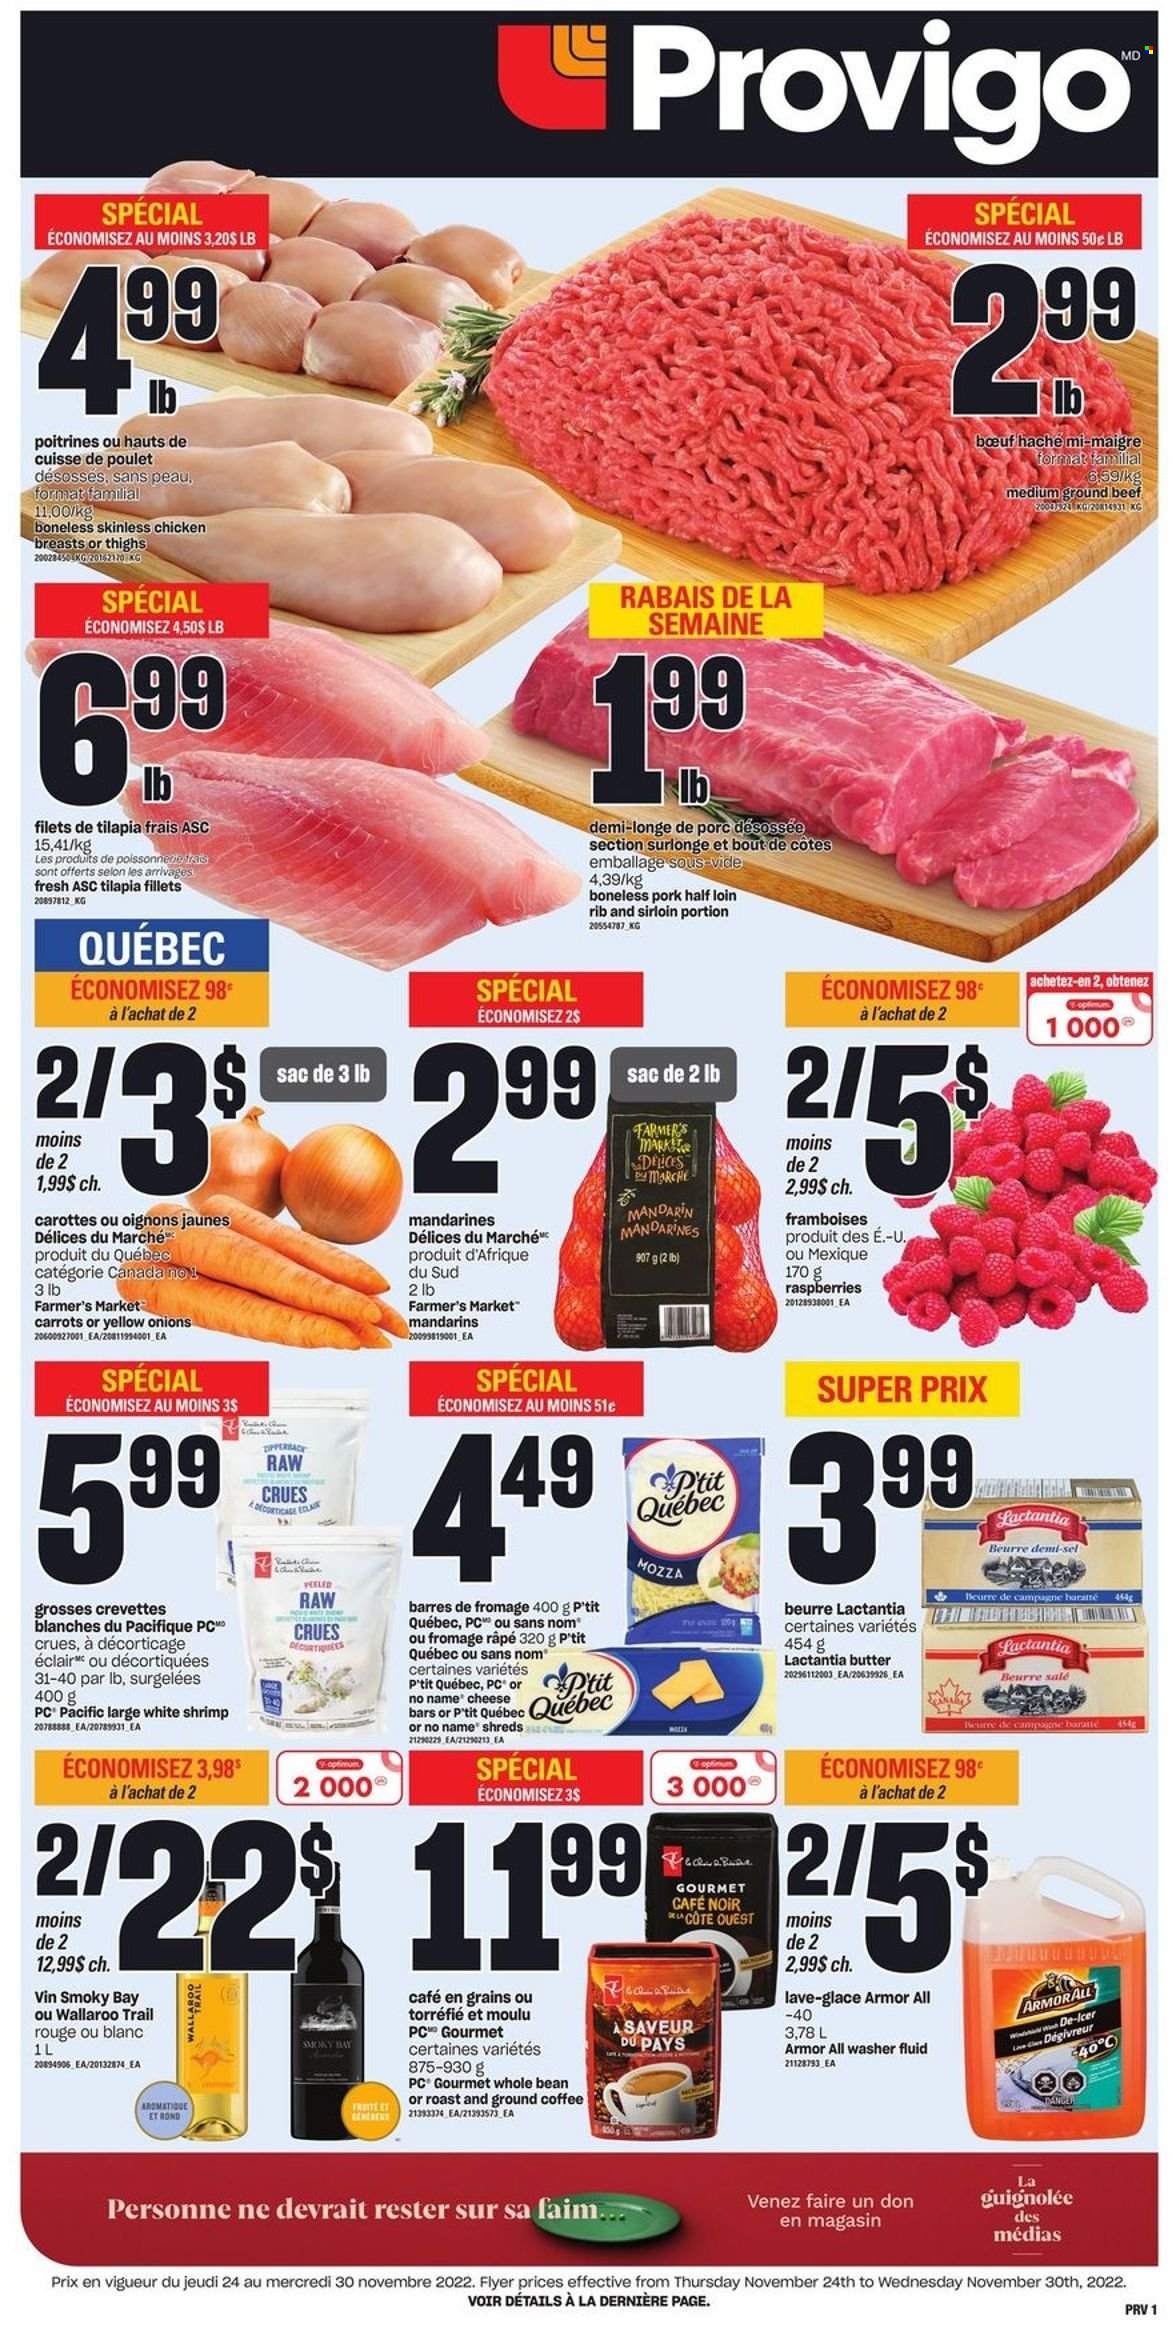 thumbnail - Provigo Flyer - November 24, 2022 - November 30, 2022 - Sales products - carrots, onion, mandarines, tilapia, shrimps, No Name, cheese, butter, coffee, ground coffee, chicken breasts, beef meat, ground beef, Optimum. Page 1.